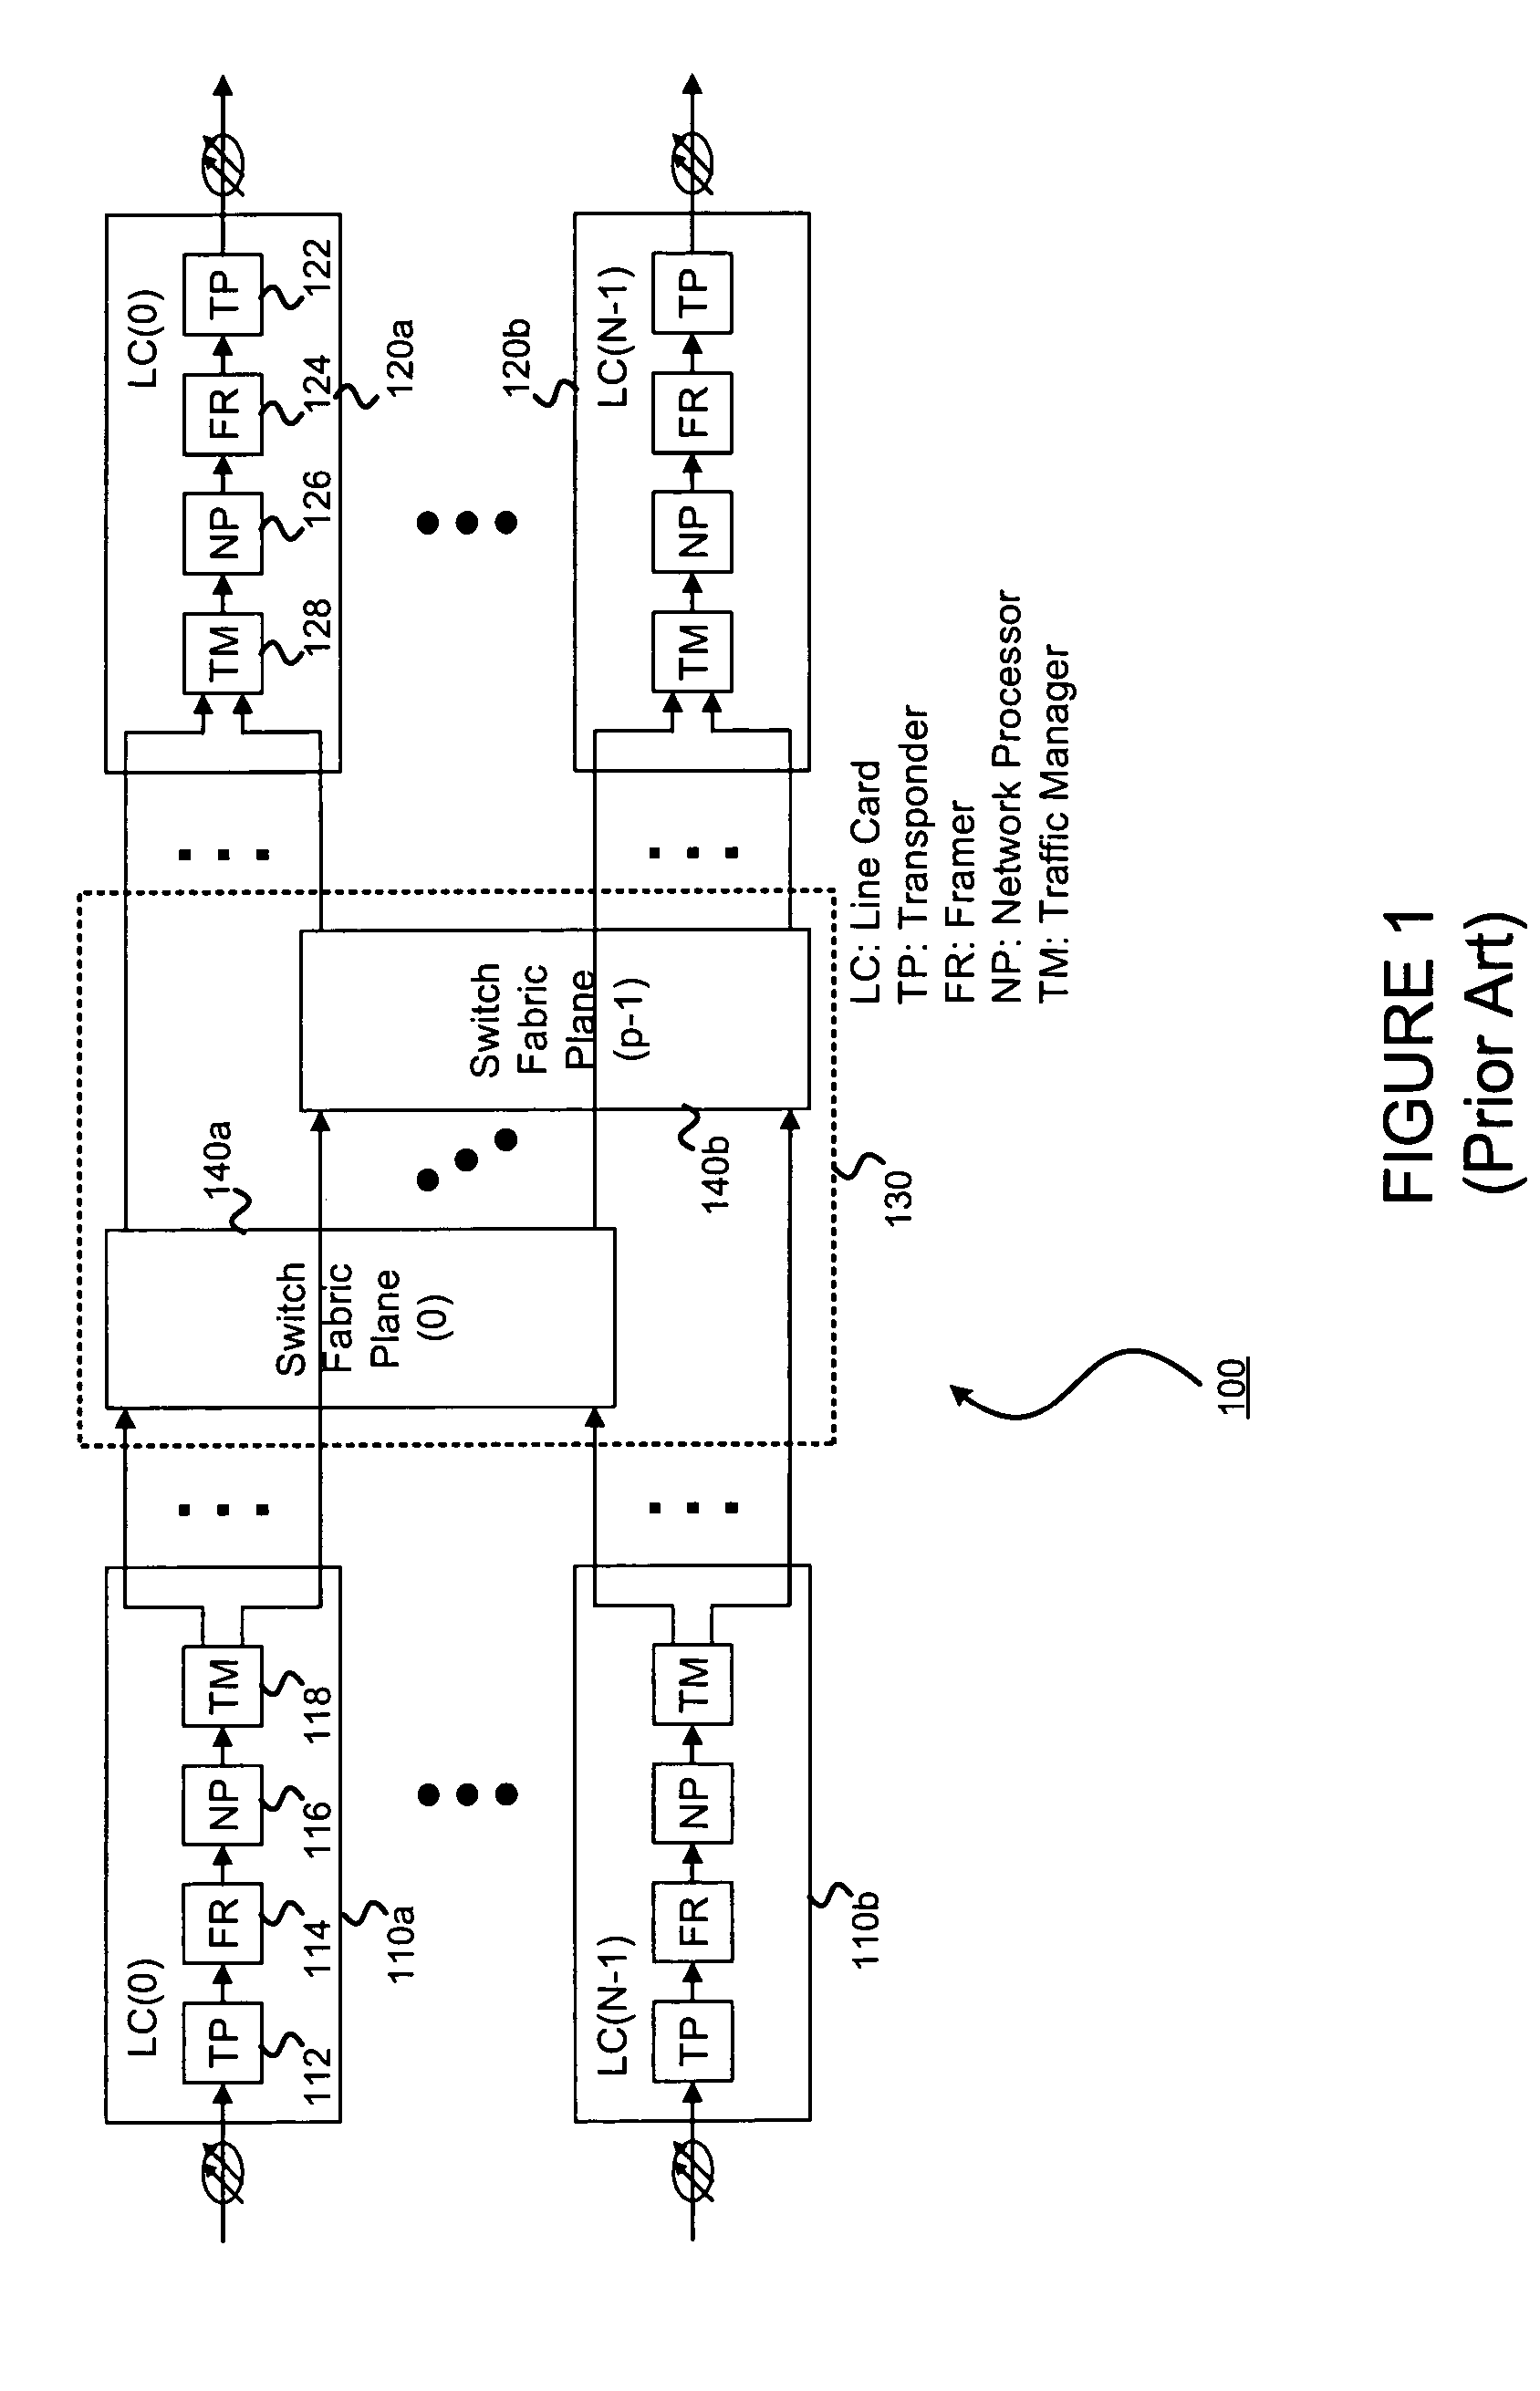 Packet reassembly and deadlock avoidance for use in a packet switch